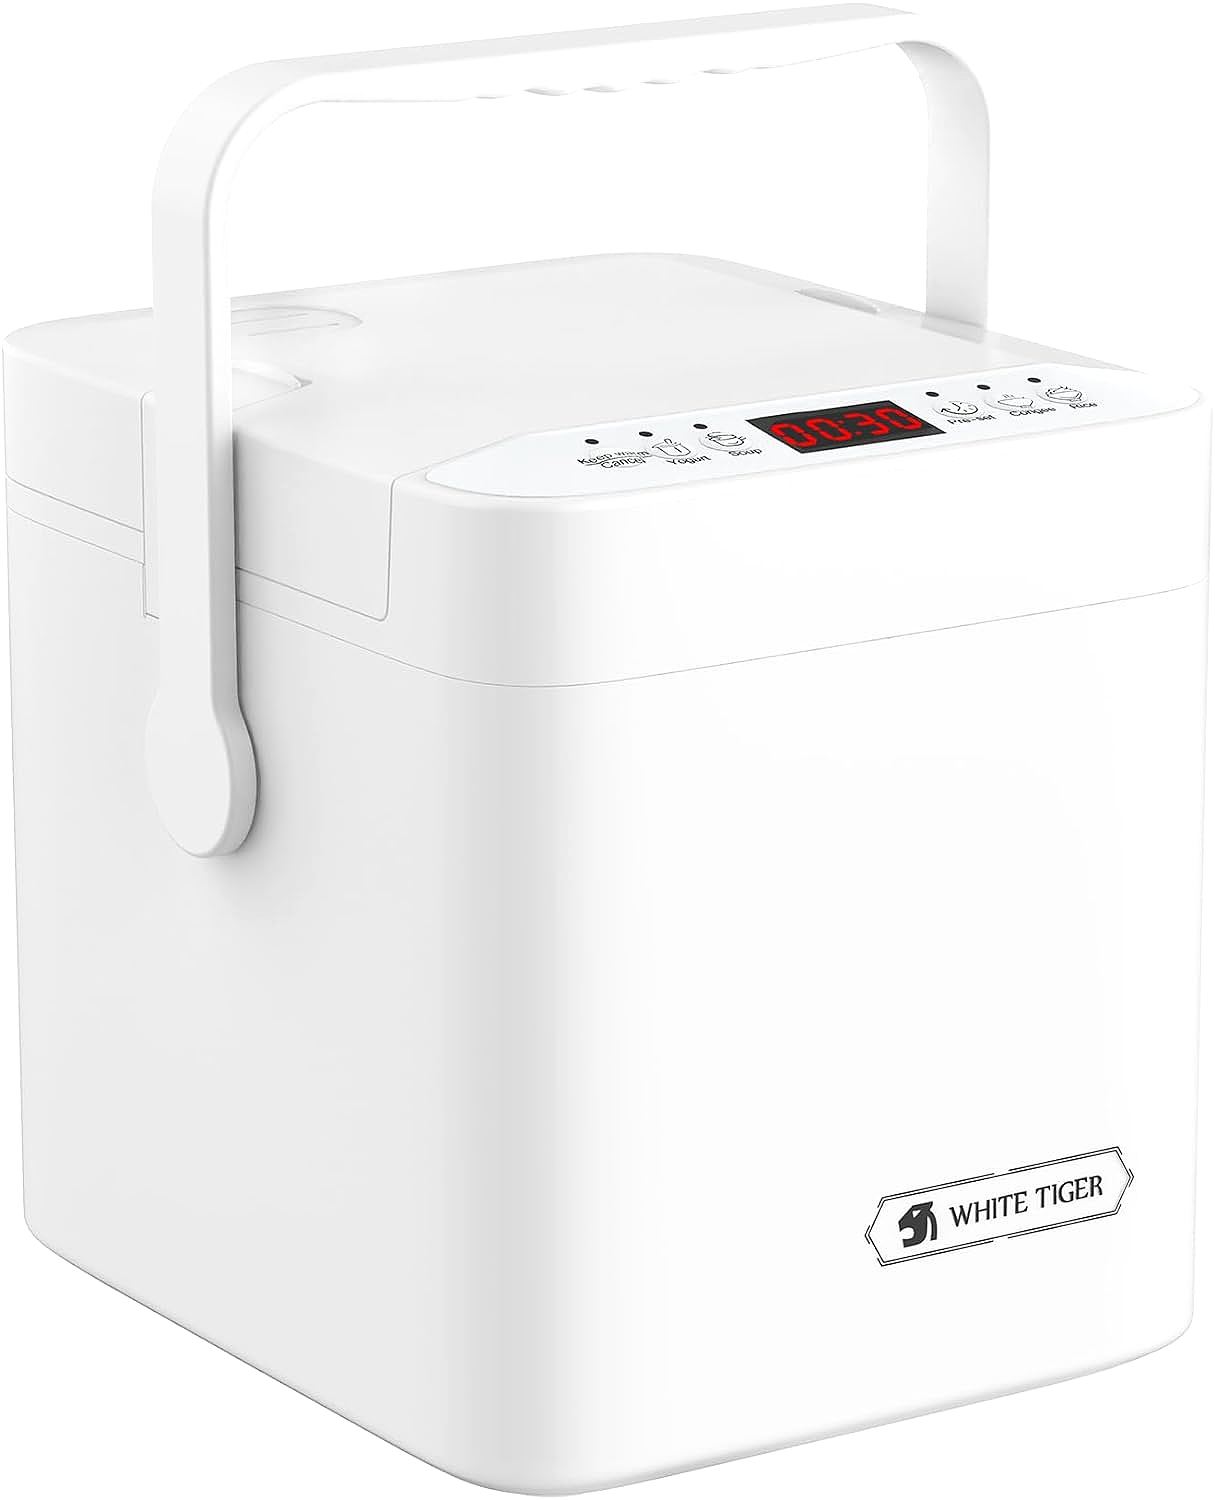 WHITE TIGER 1.3L Mini Rice Cooker: A Compact and Convenient Smart Rice Cooker for Small Households